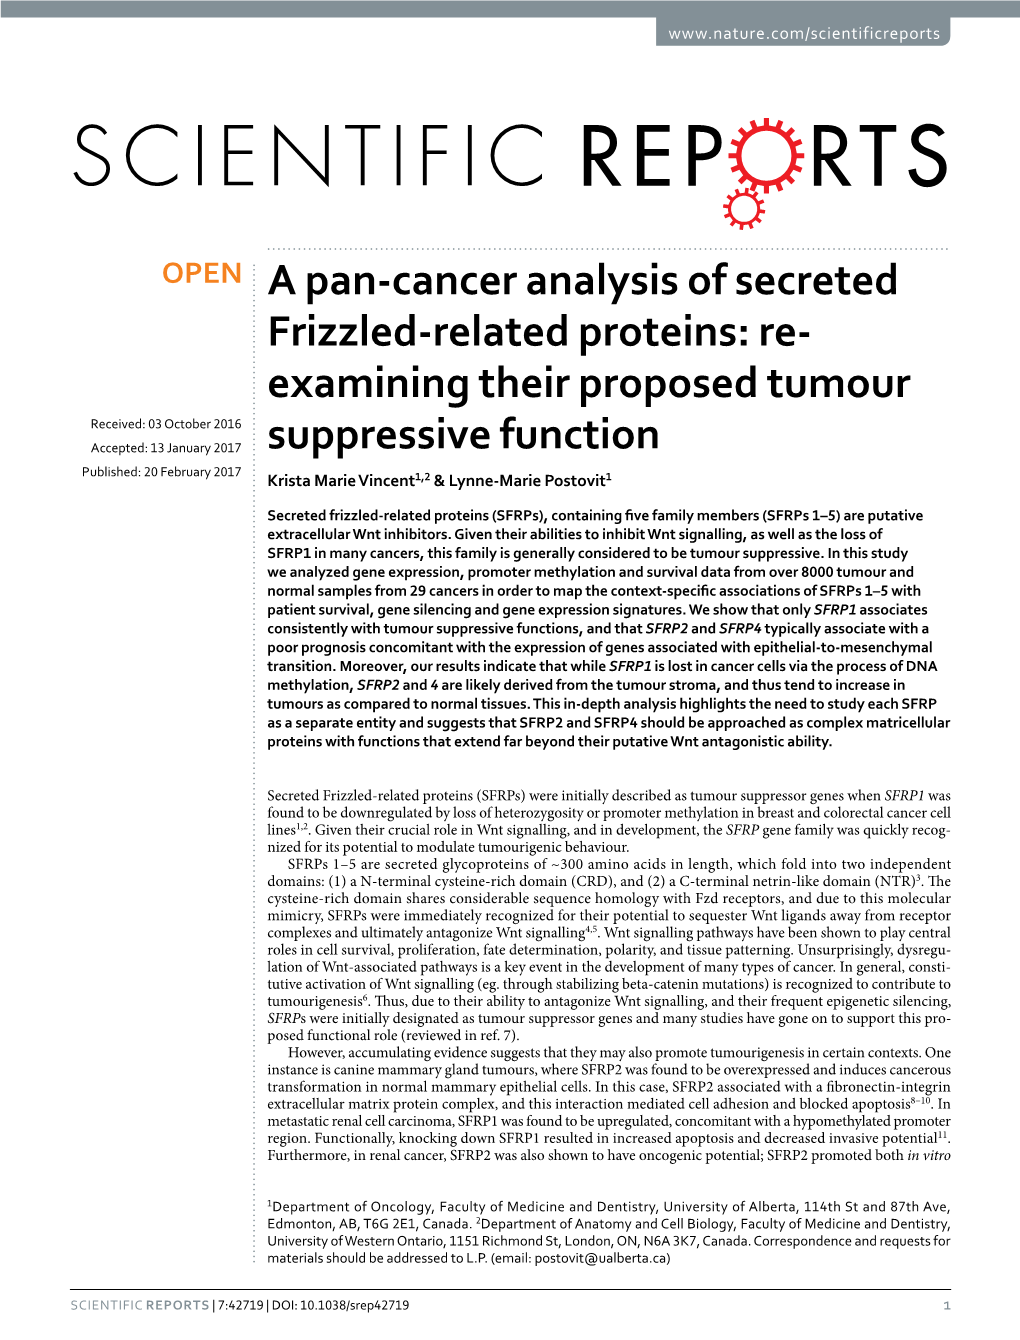 A Pan-Cancer Analysis of Secreted Frizzled-Related Proteins: Re